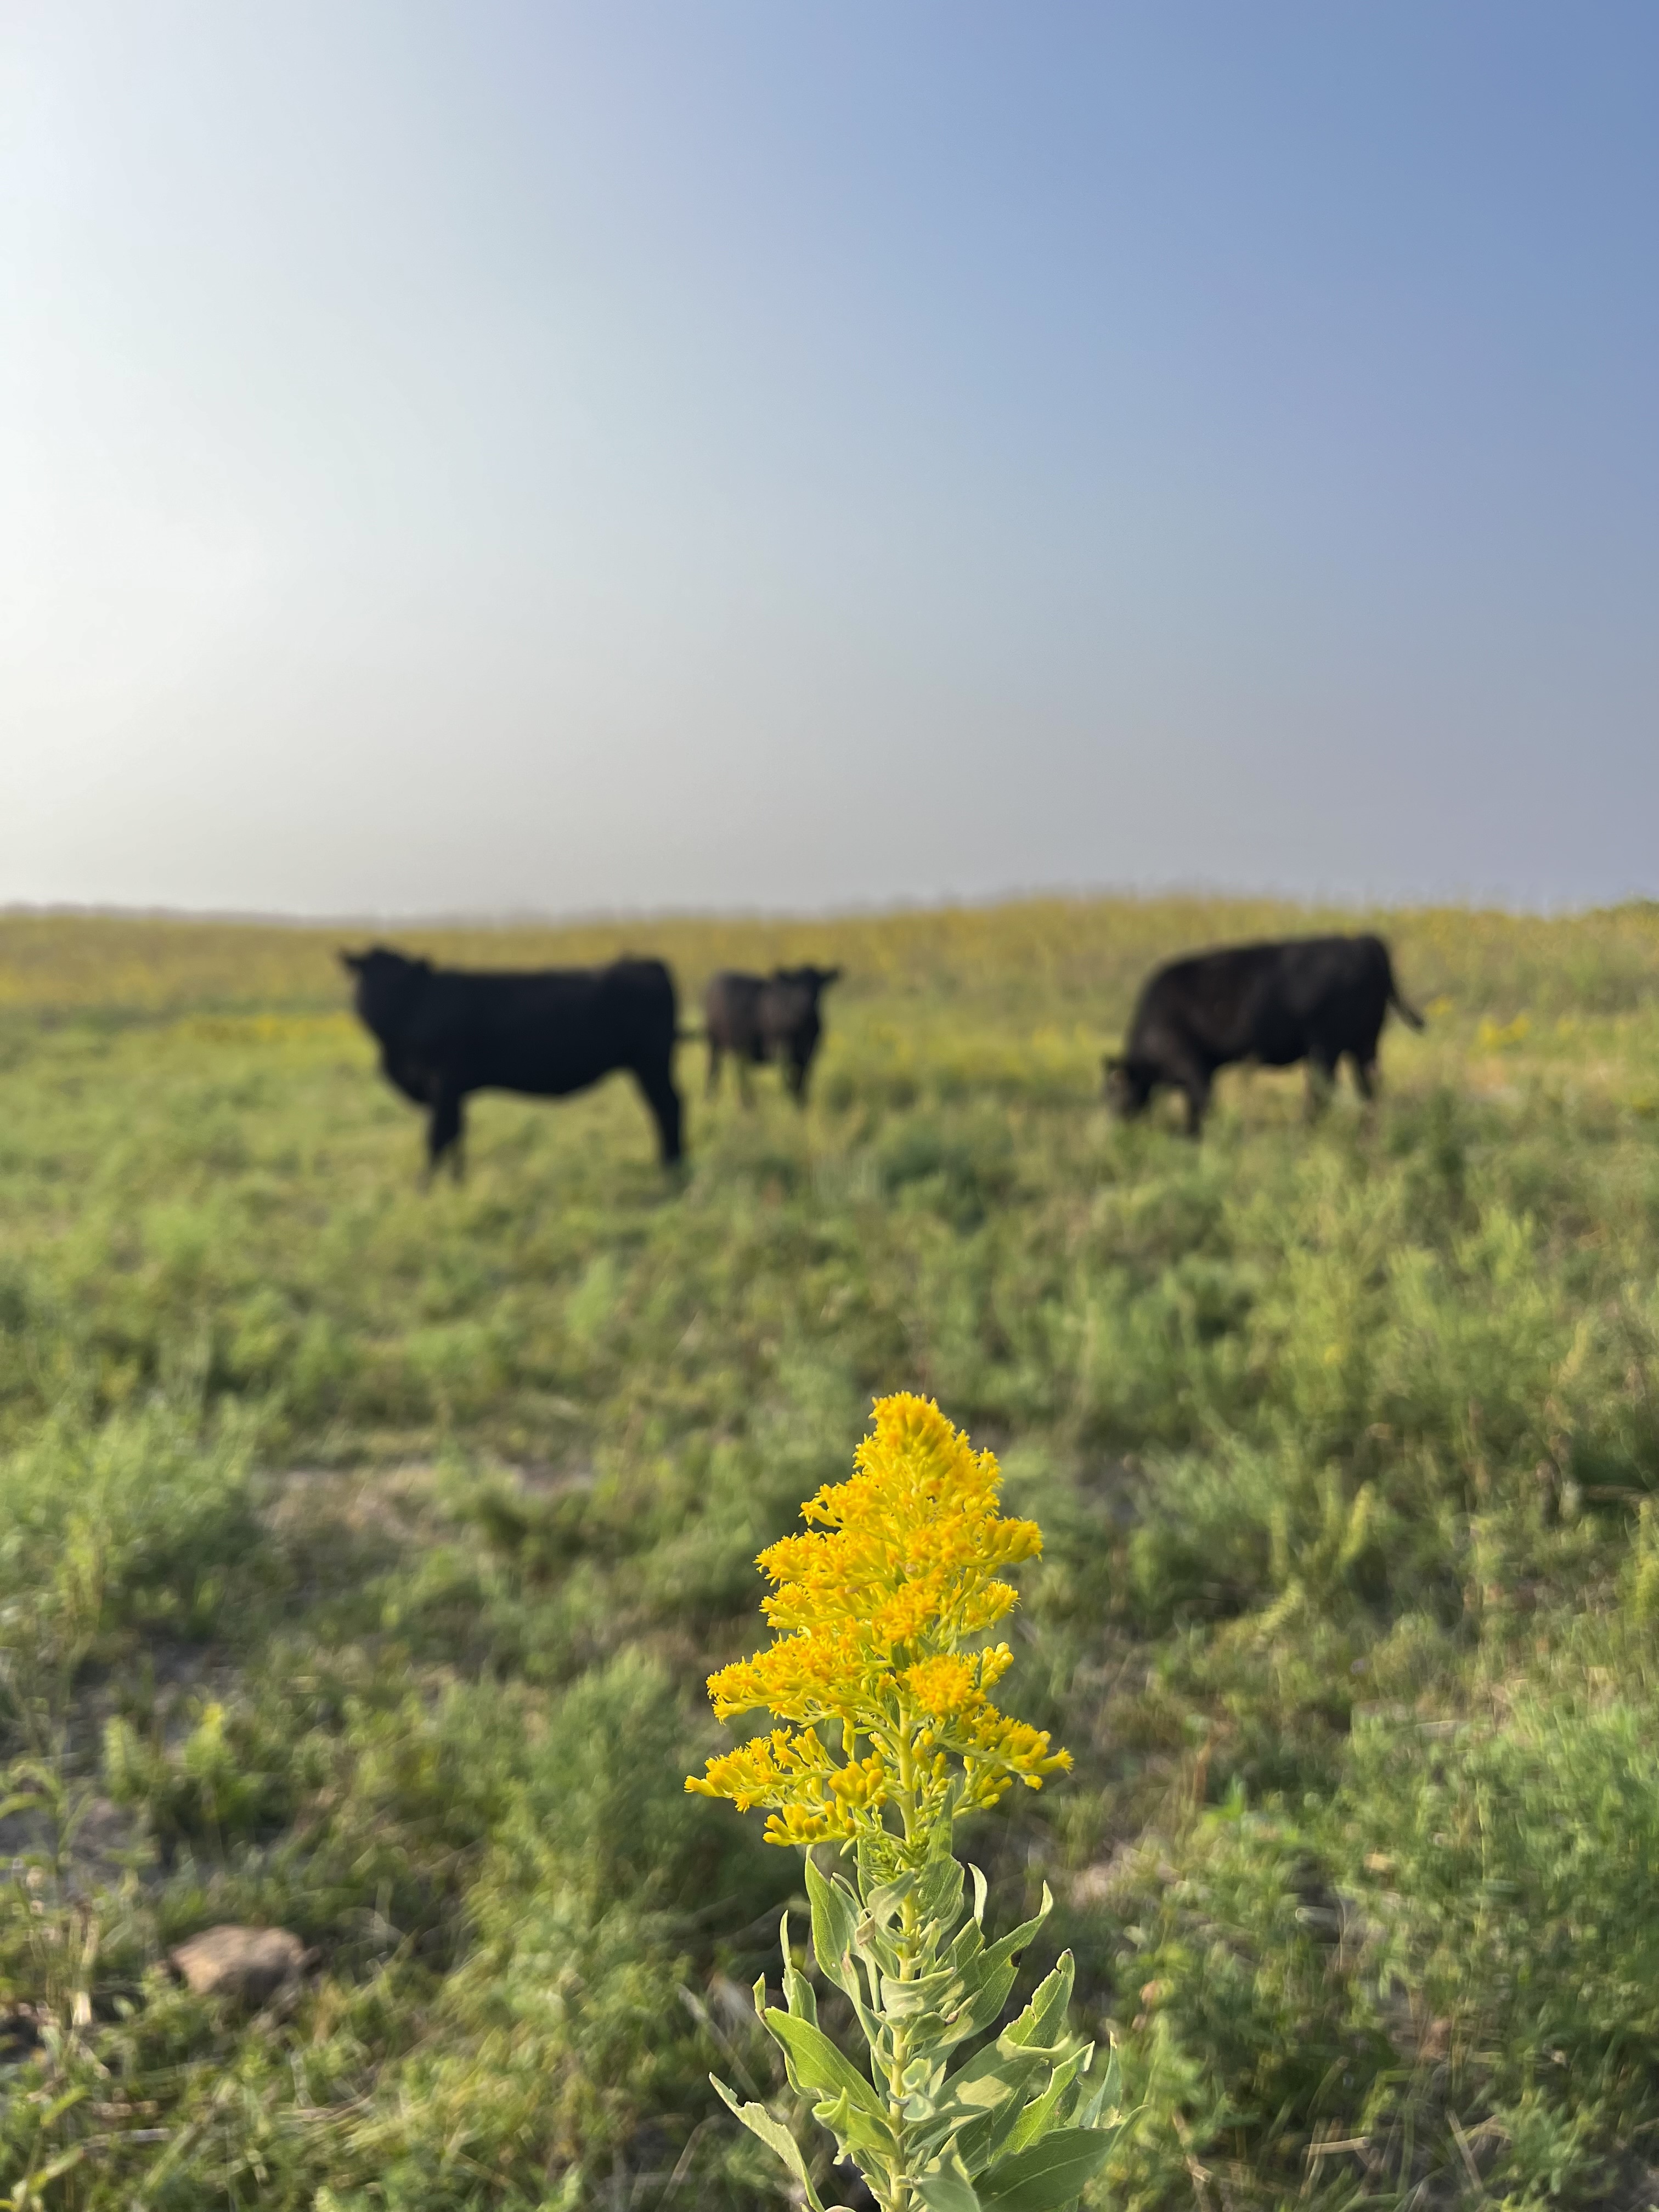 a goldenrod plant is in focus with black cows in the background